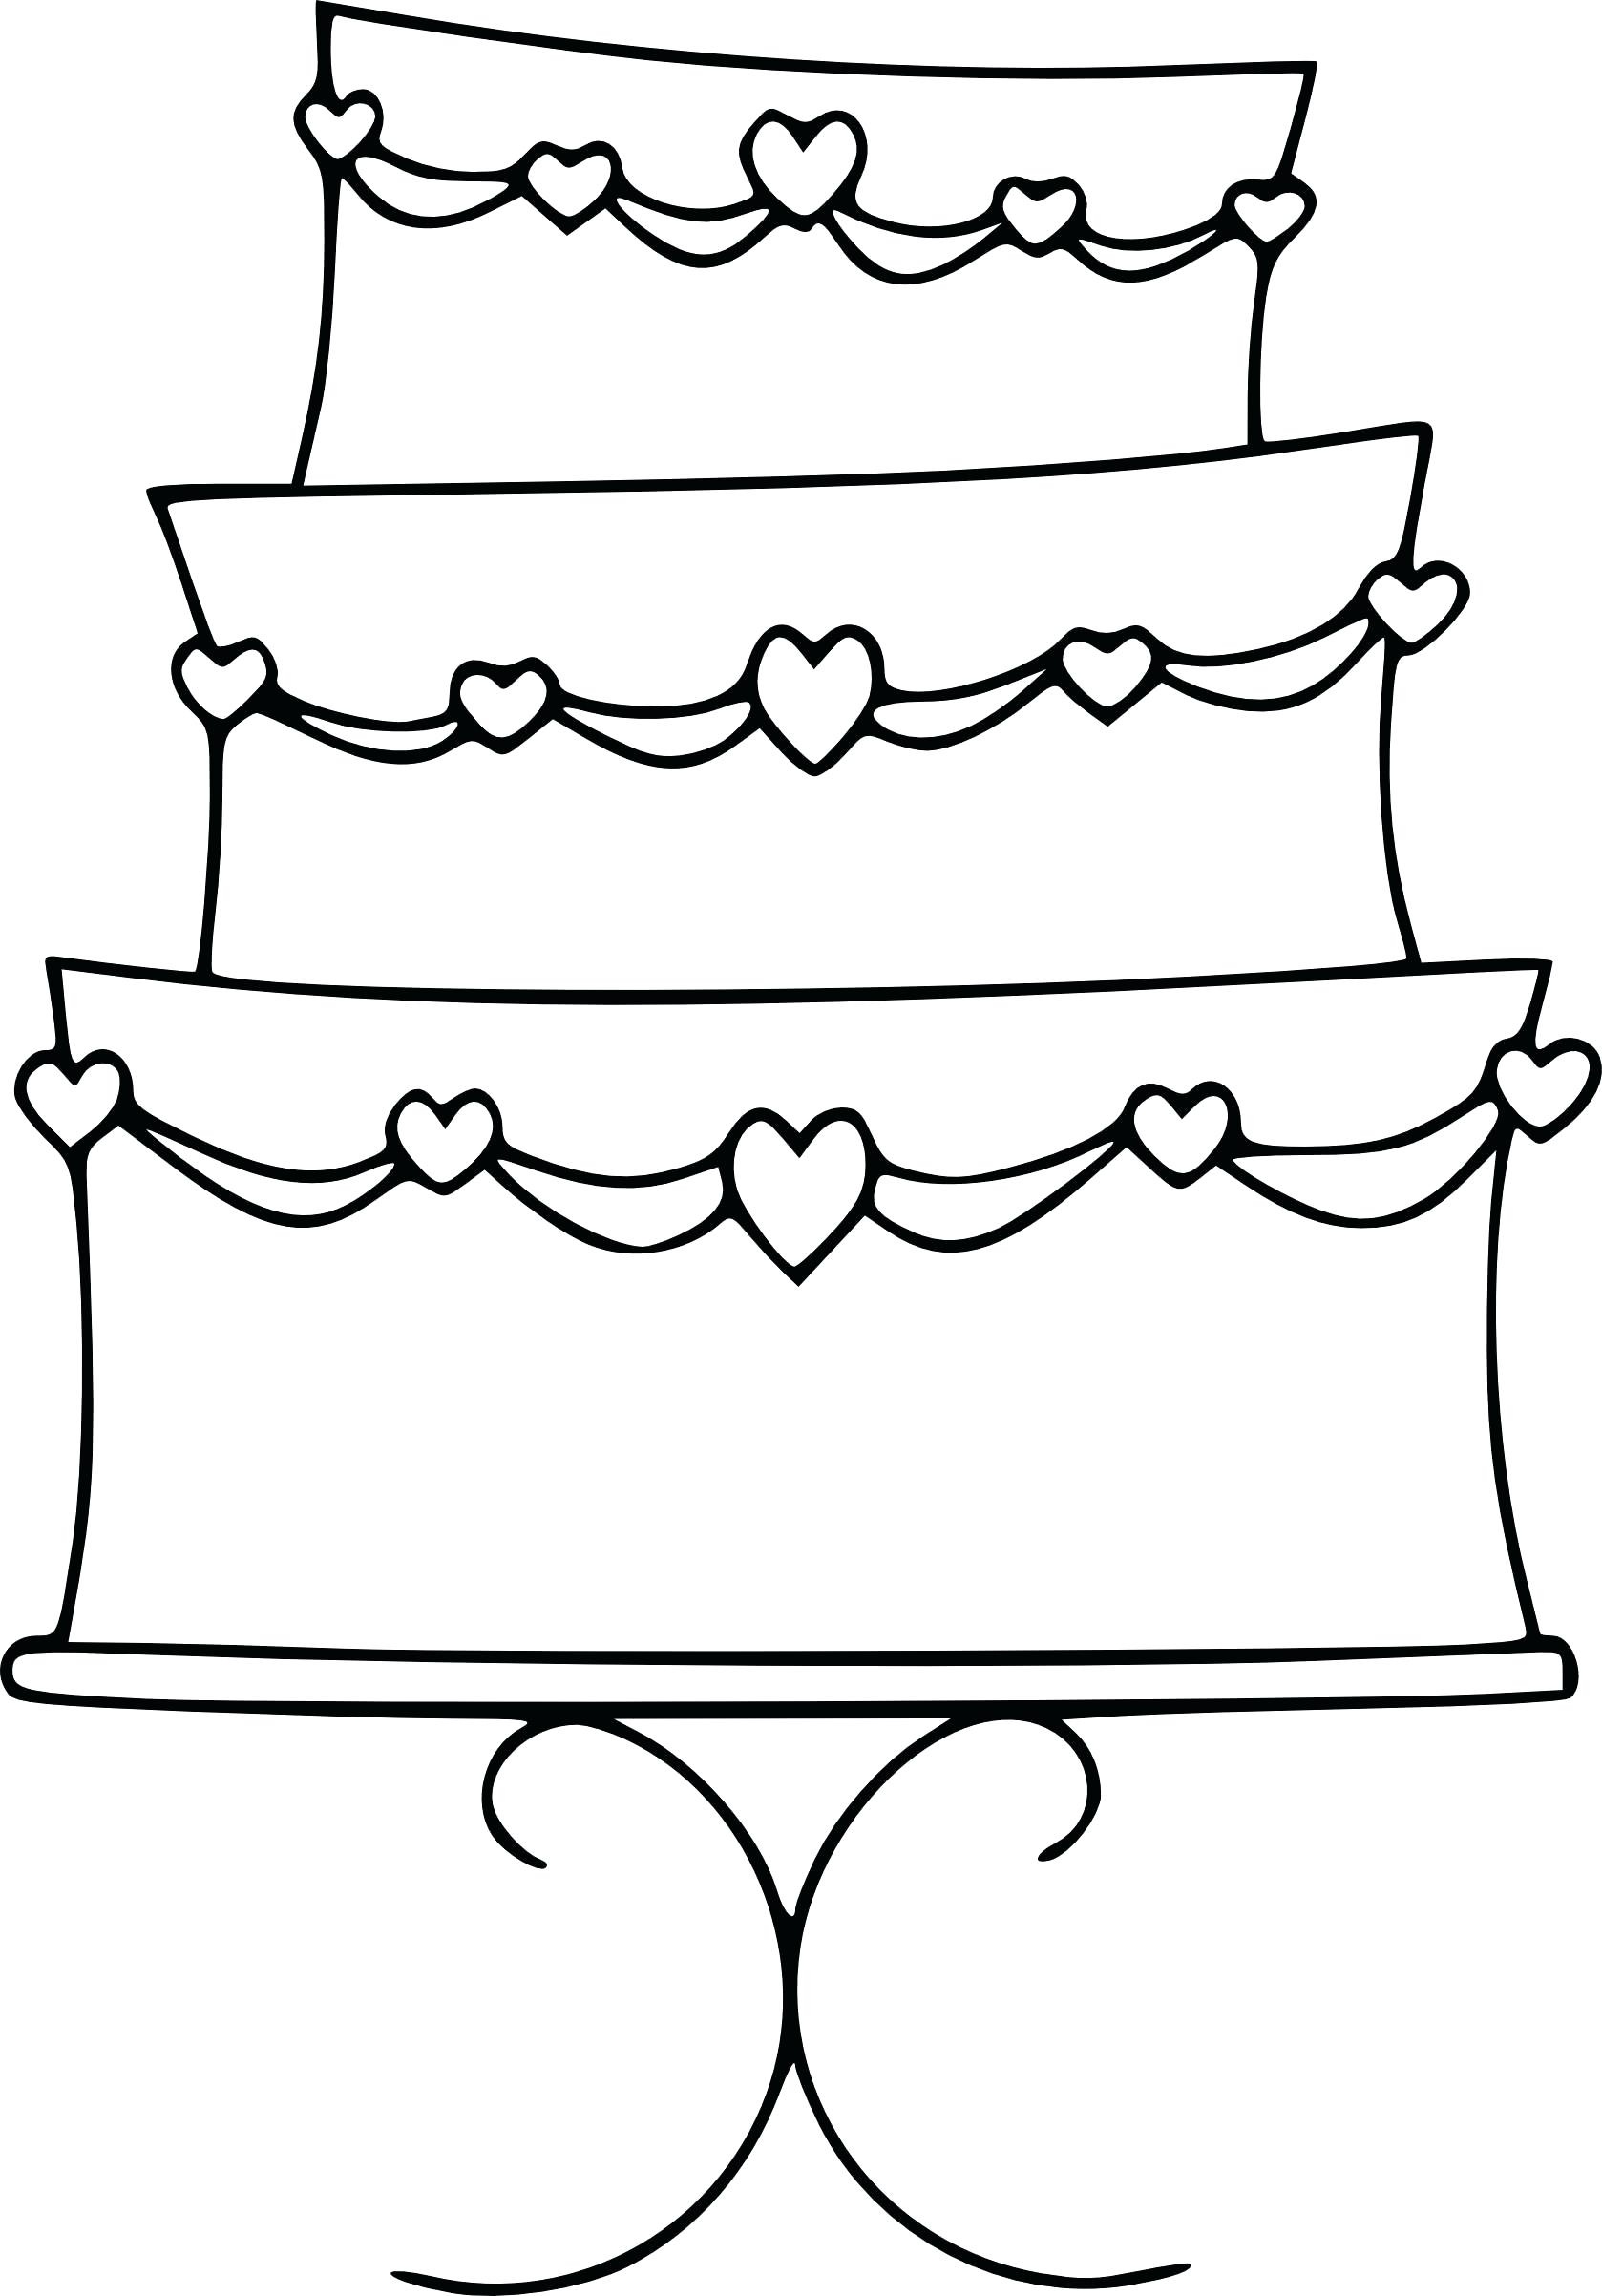 Coloring Ideas : Wedding Coloringk Printable Pages Free For Activity - Wedding Coloring Book Free Printable